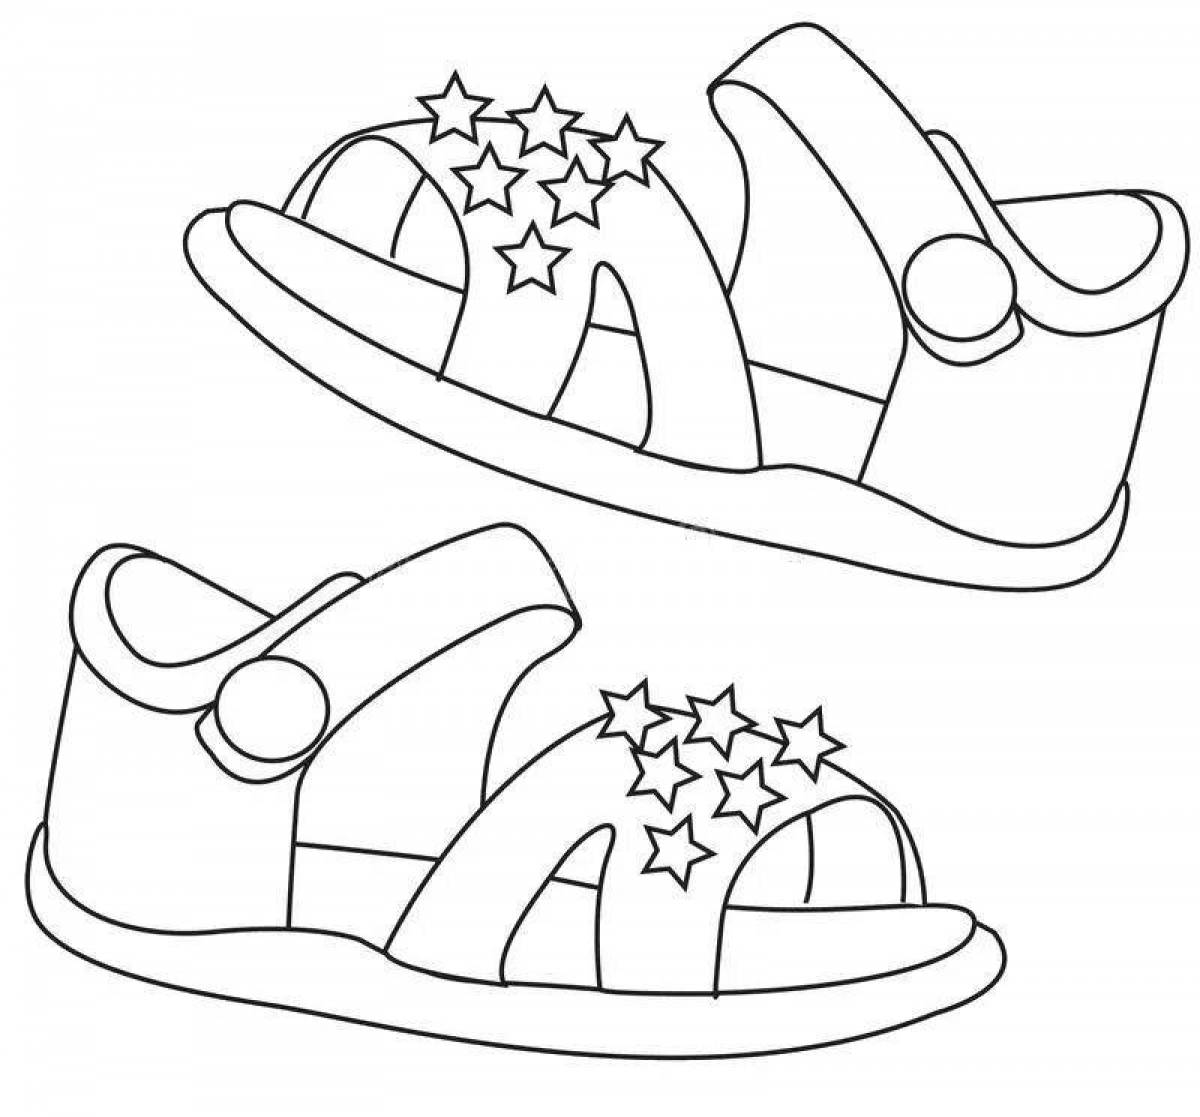 Coloring page dazzling shoes for children 5-6 years old